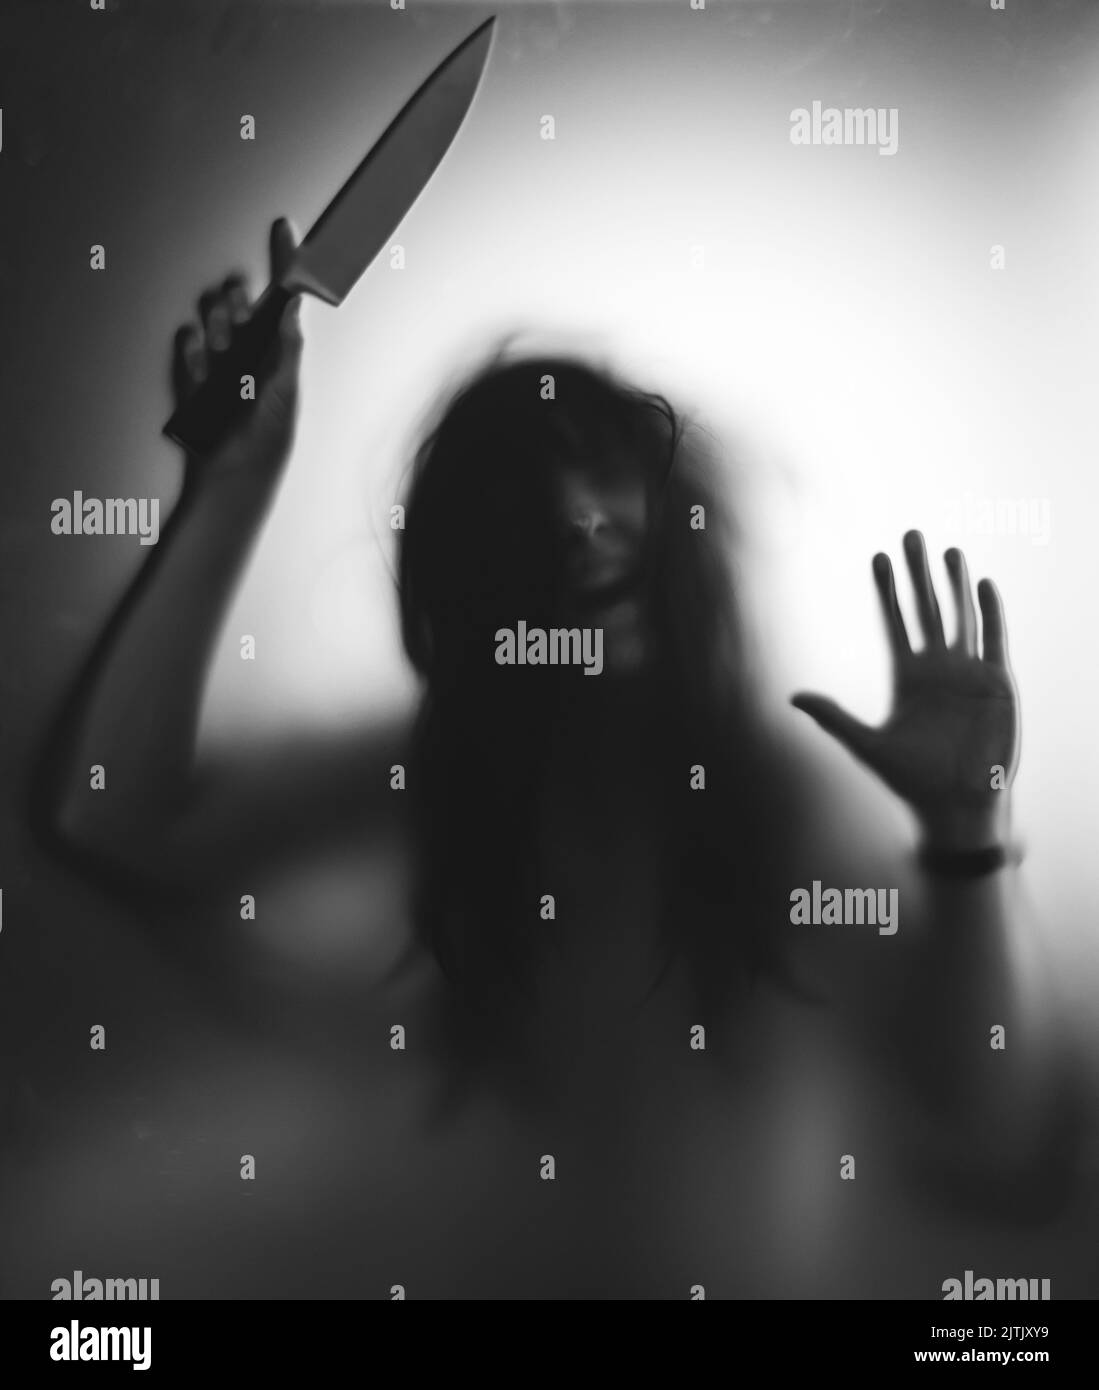 Horror, halloween background - Shadowy figure behind glass holding a knife Stock Photo